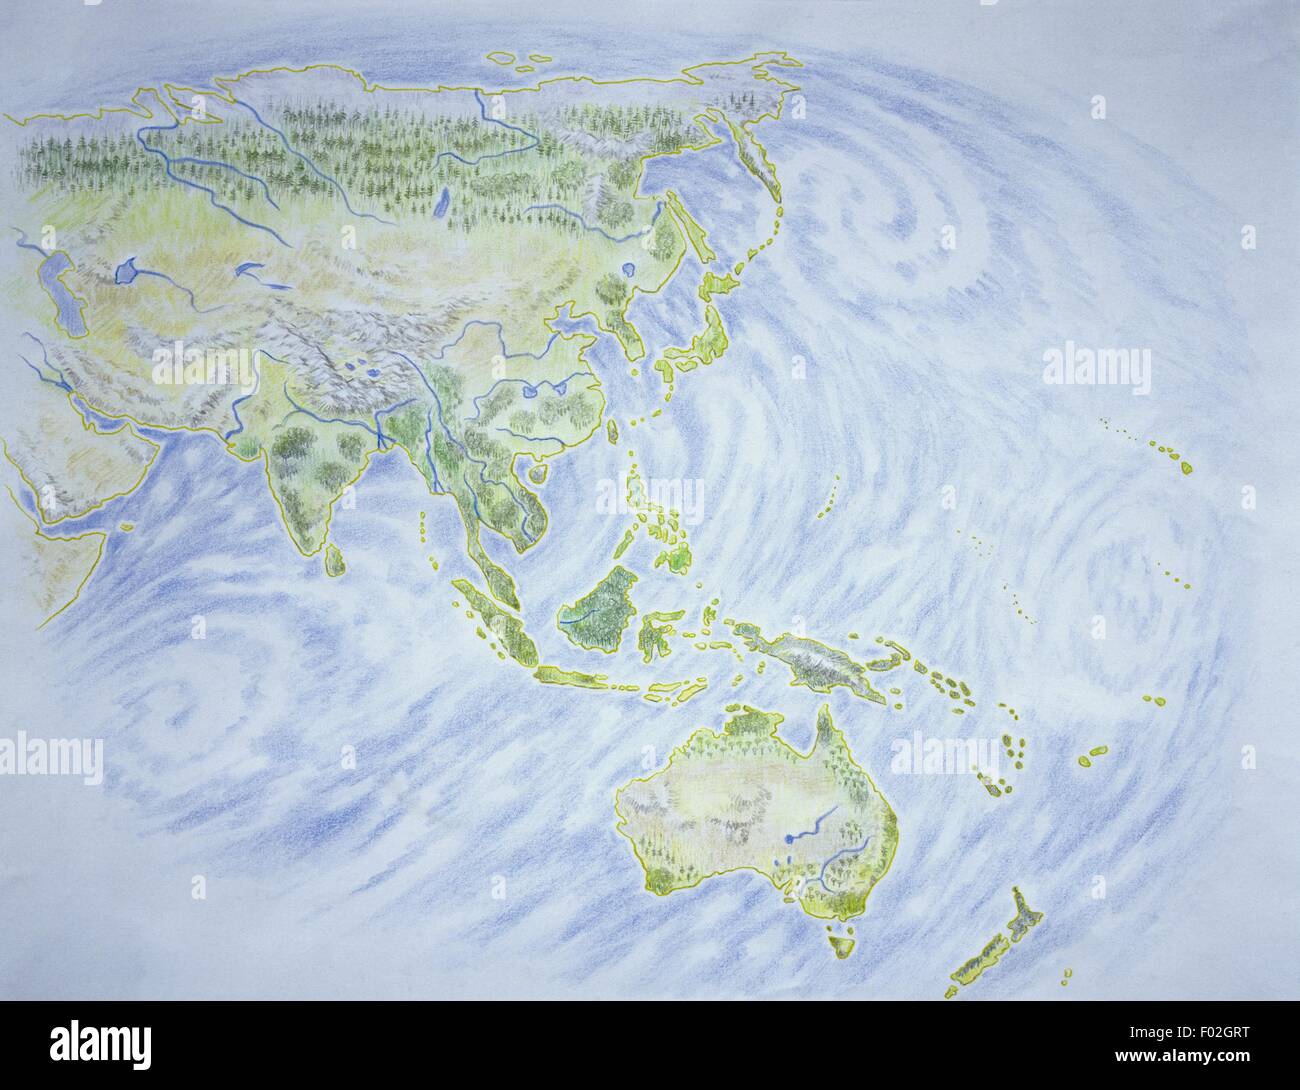 Cartography - Map of Asia and Oceania, illustration Stock Photo